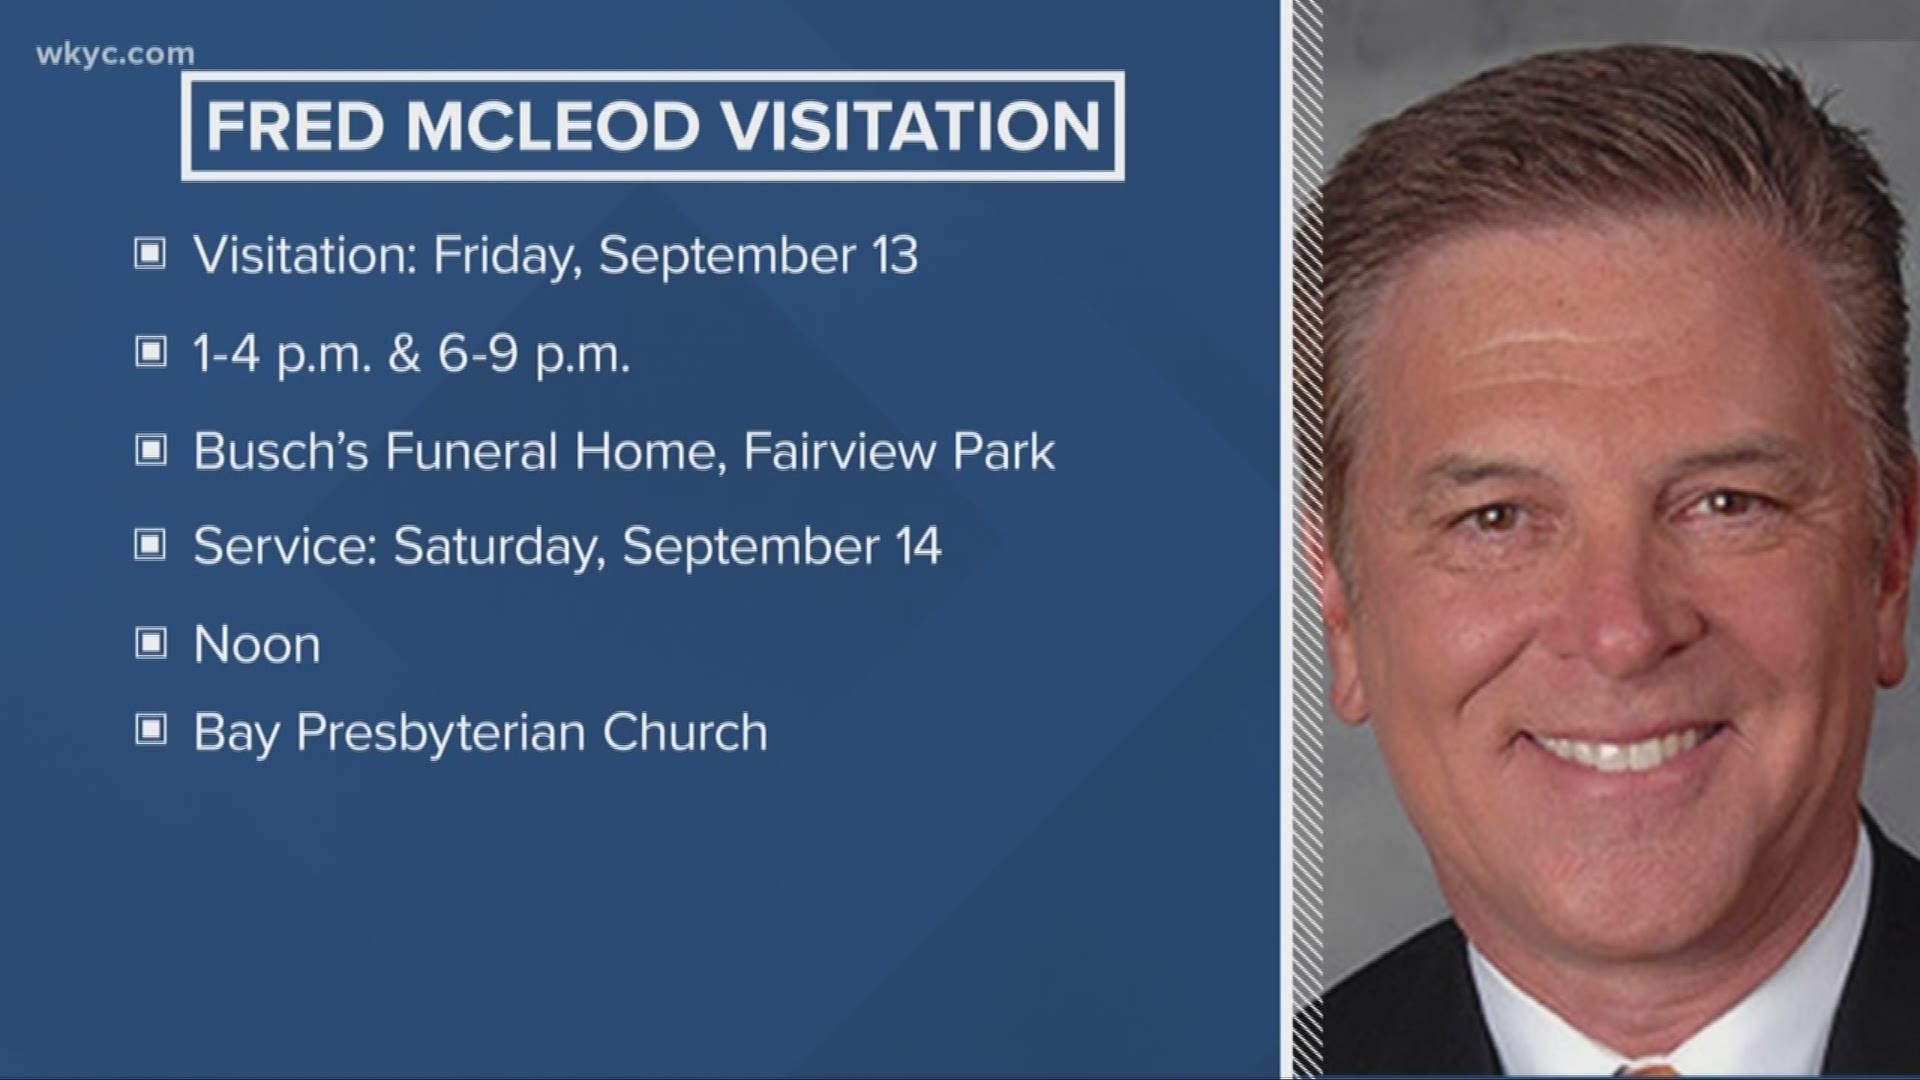 McLeod’s family will receive friends this Friday, September 13th from 1-4 p.m. and 6-9 p.m. at Busch’s funeral home in Fairview Park. On Saturday, September 14th, McLeod’s funeral service will take place at noon at the Bay Presbyterian Church in Bay Village. The Cavaliers will live stream the funeral service at Cavs.com.